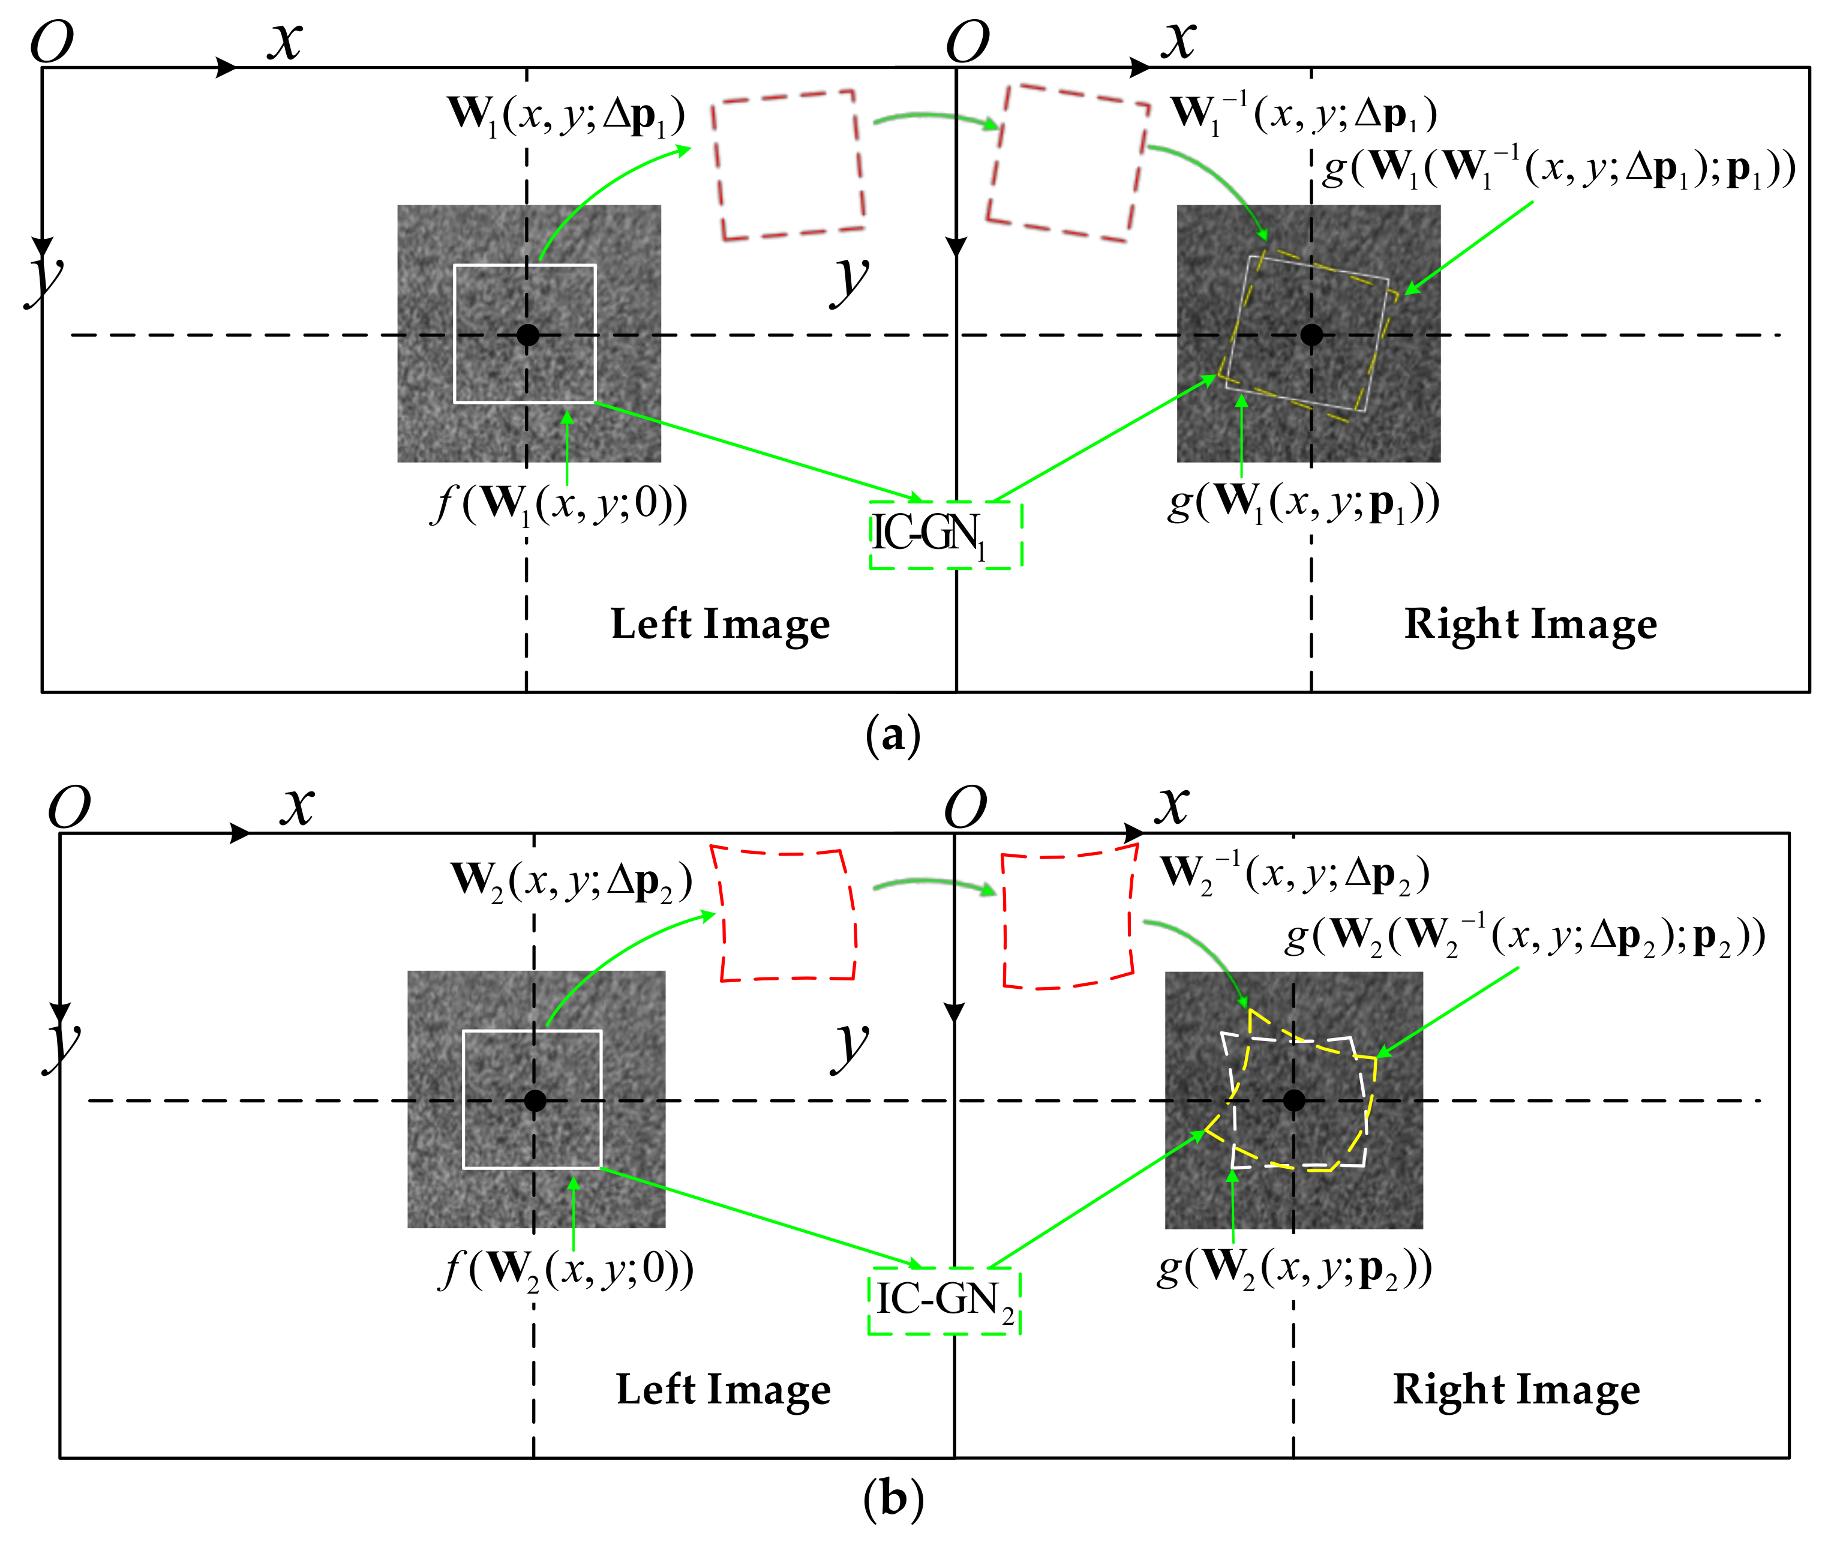 Sensors Free Full Text Comparative Analysis Of Warp Function For Digital Image Correlation Based Accurate Single Shot 3d Shape Measurement Html